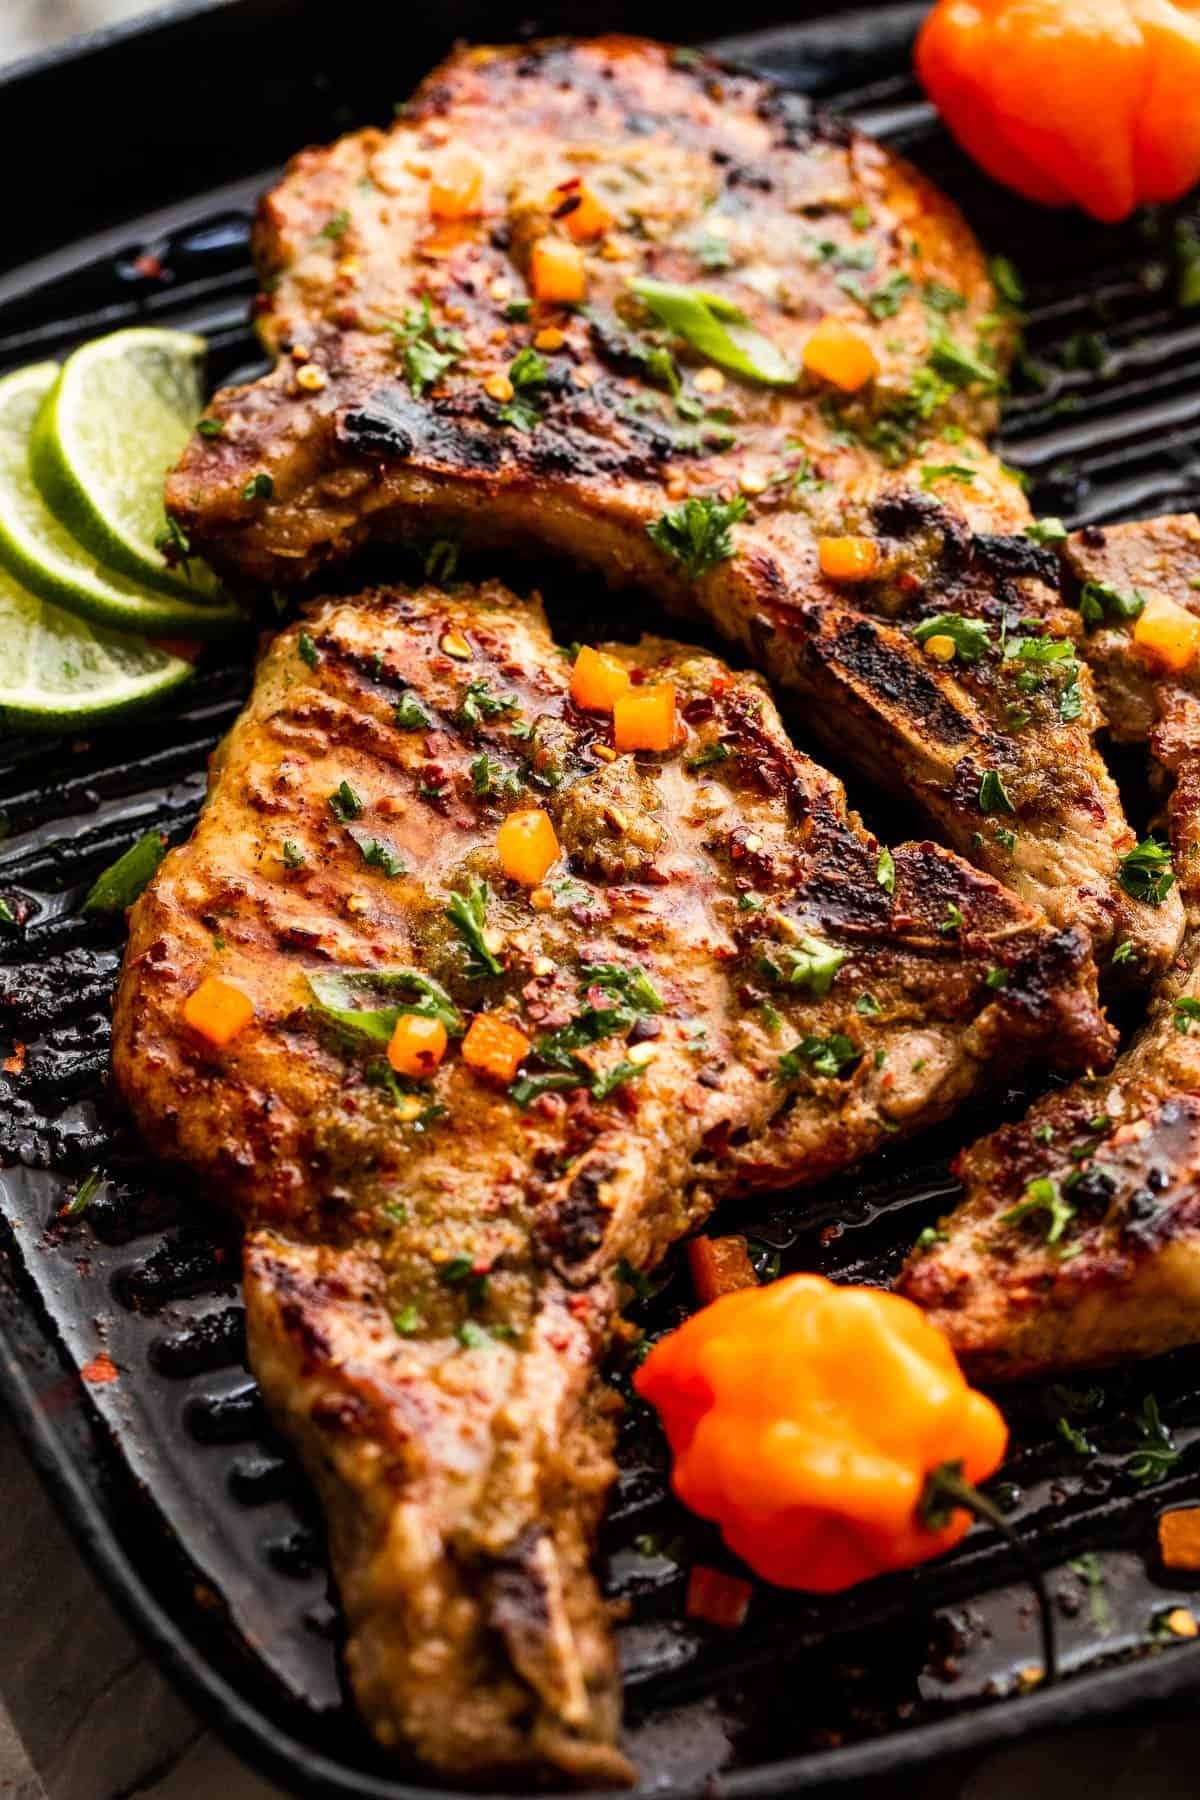 Pork chops seasoned with herbs and spiced grilled on a pan. 